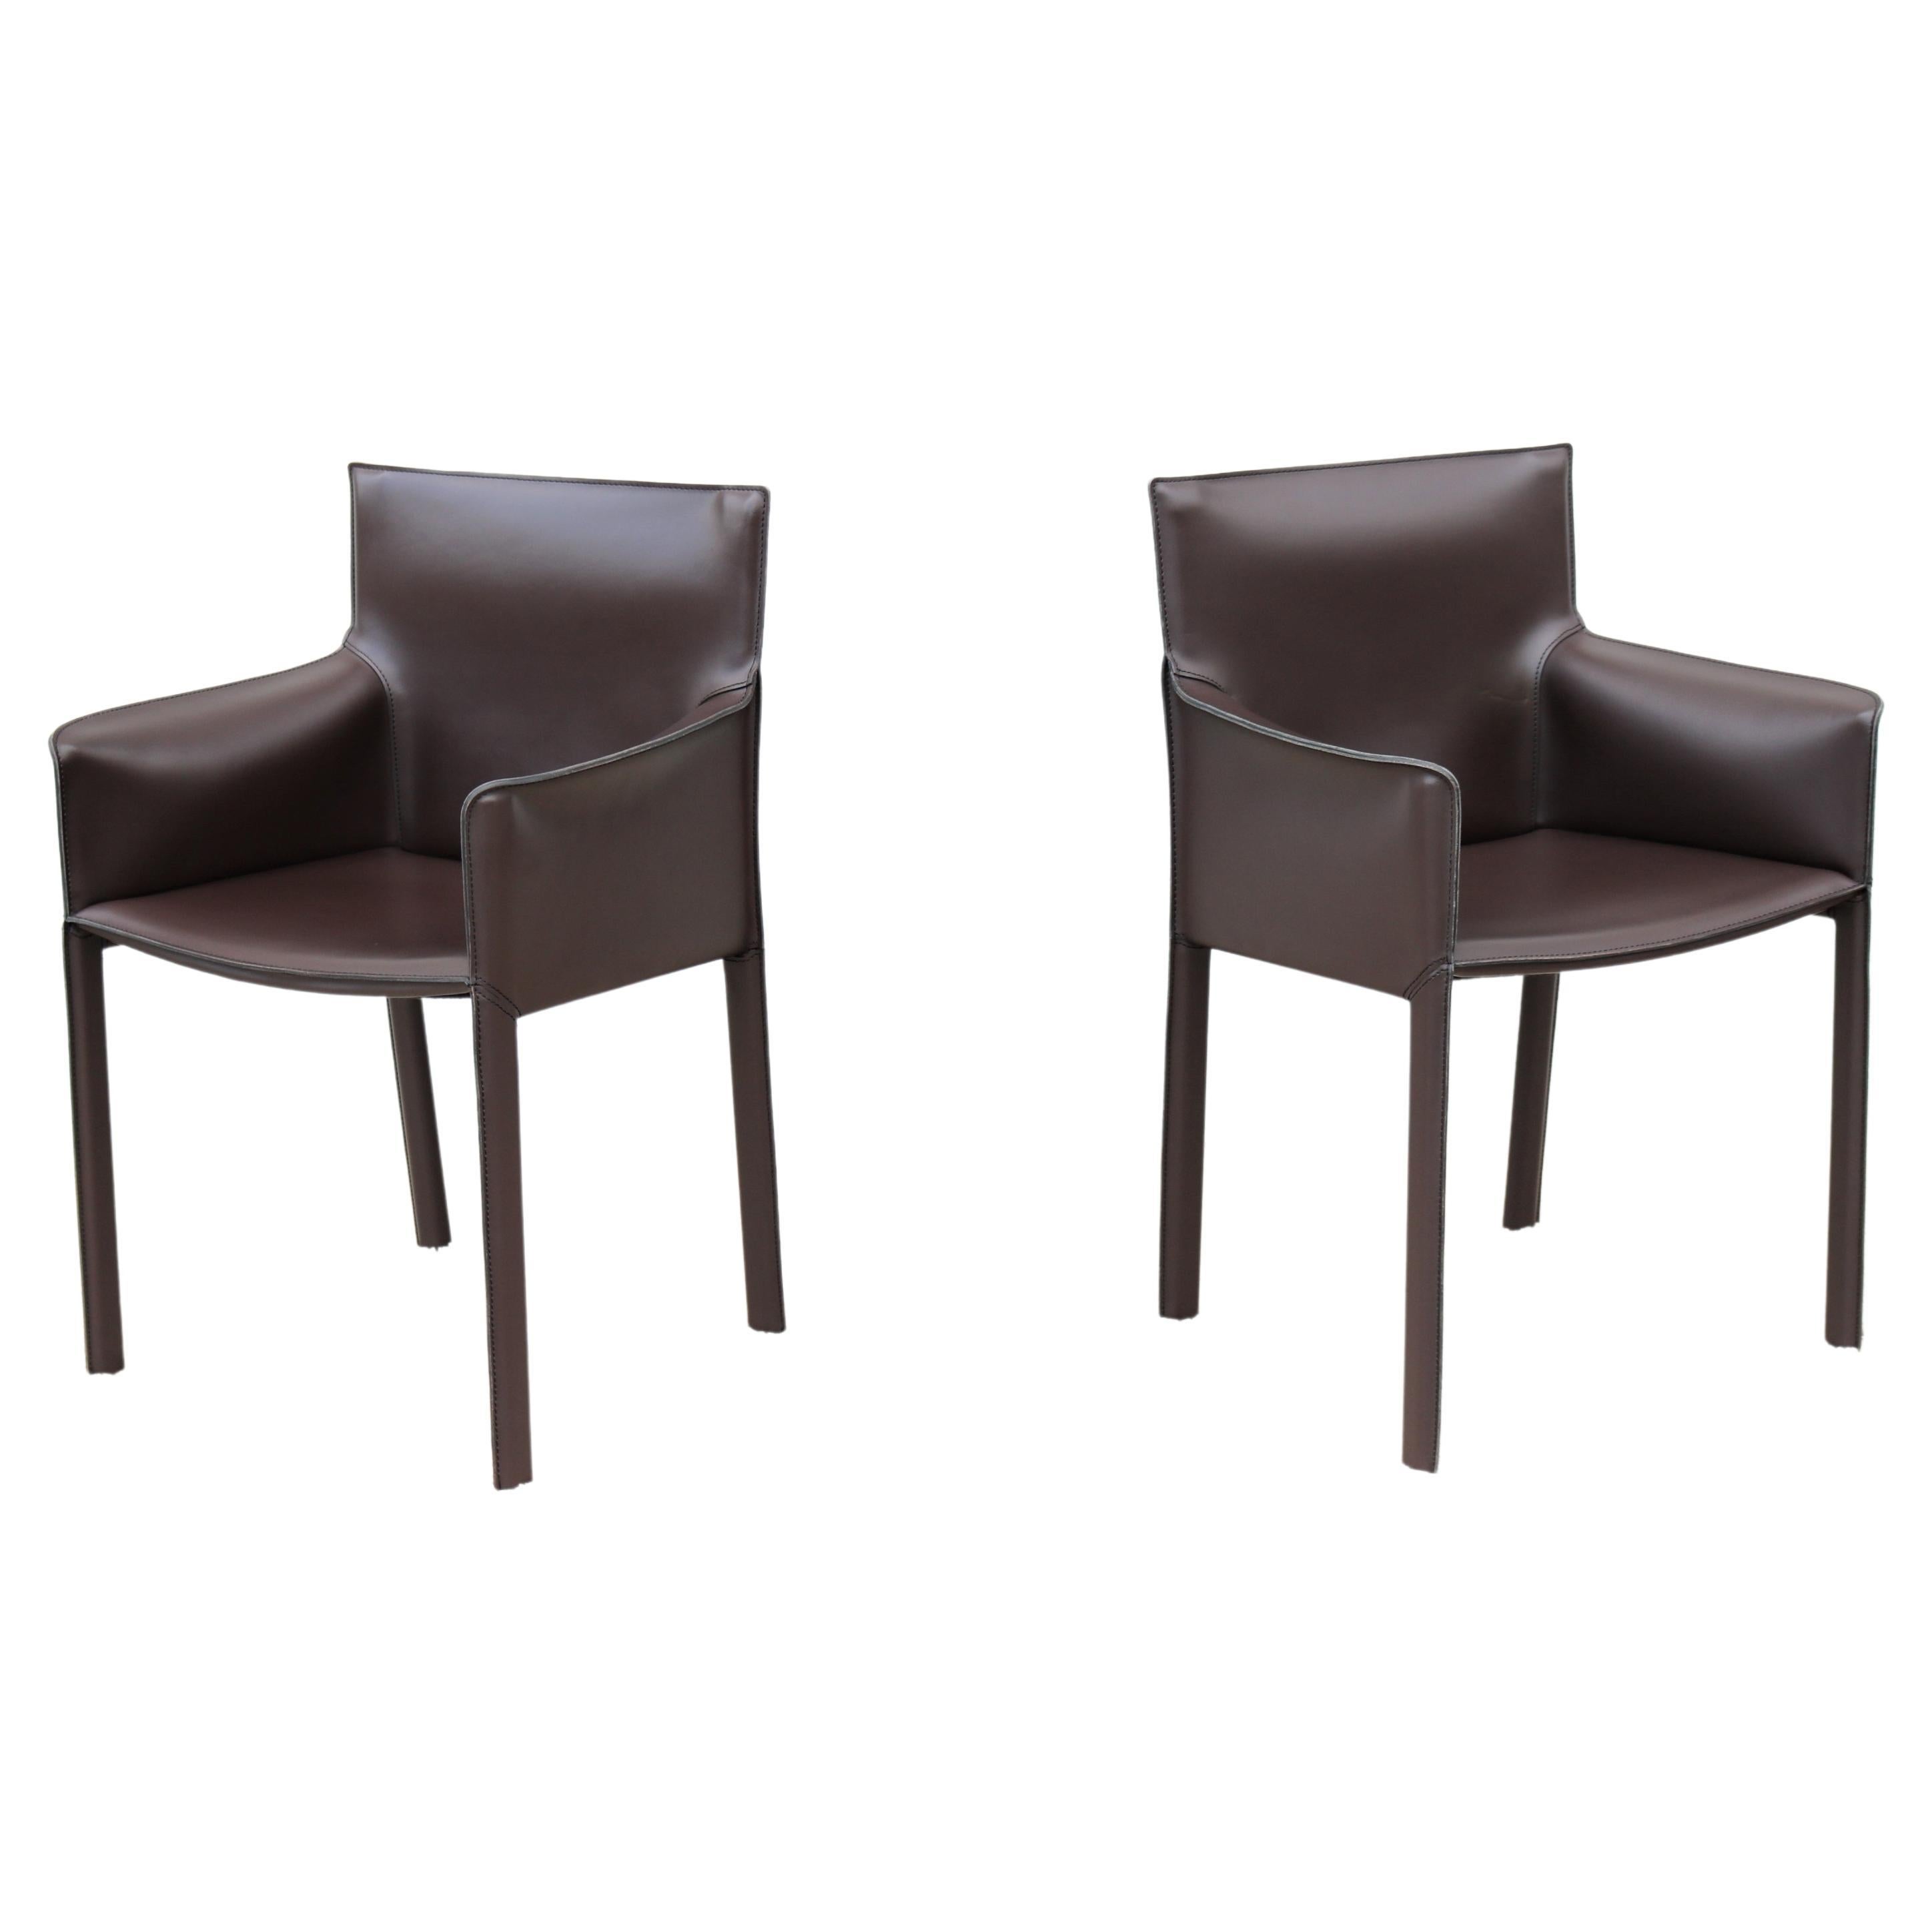 Italy Grassi & Bianchi for Enrico Pellizzoni Leather Pasqualina Armchairs a Pair For Sale